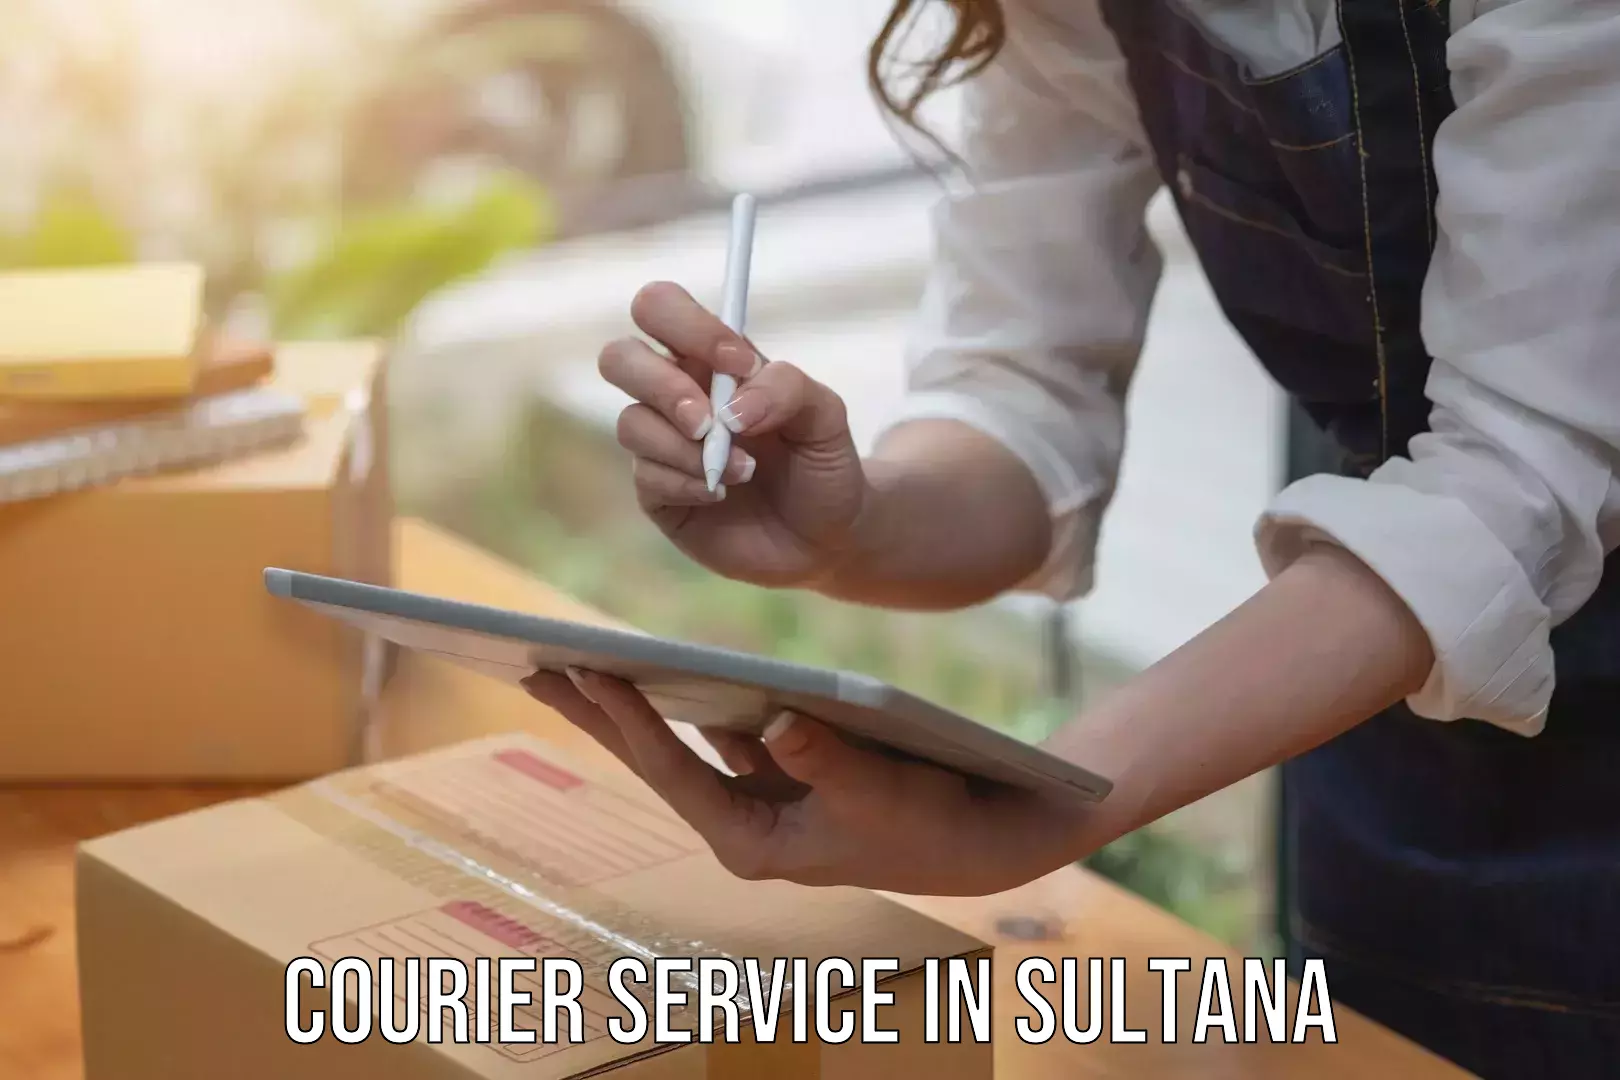 Express package handling in Sultana